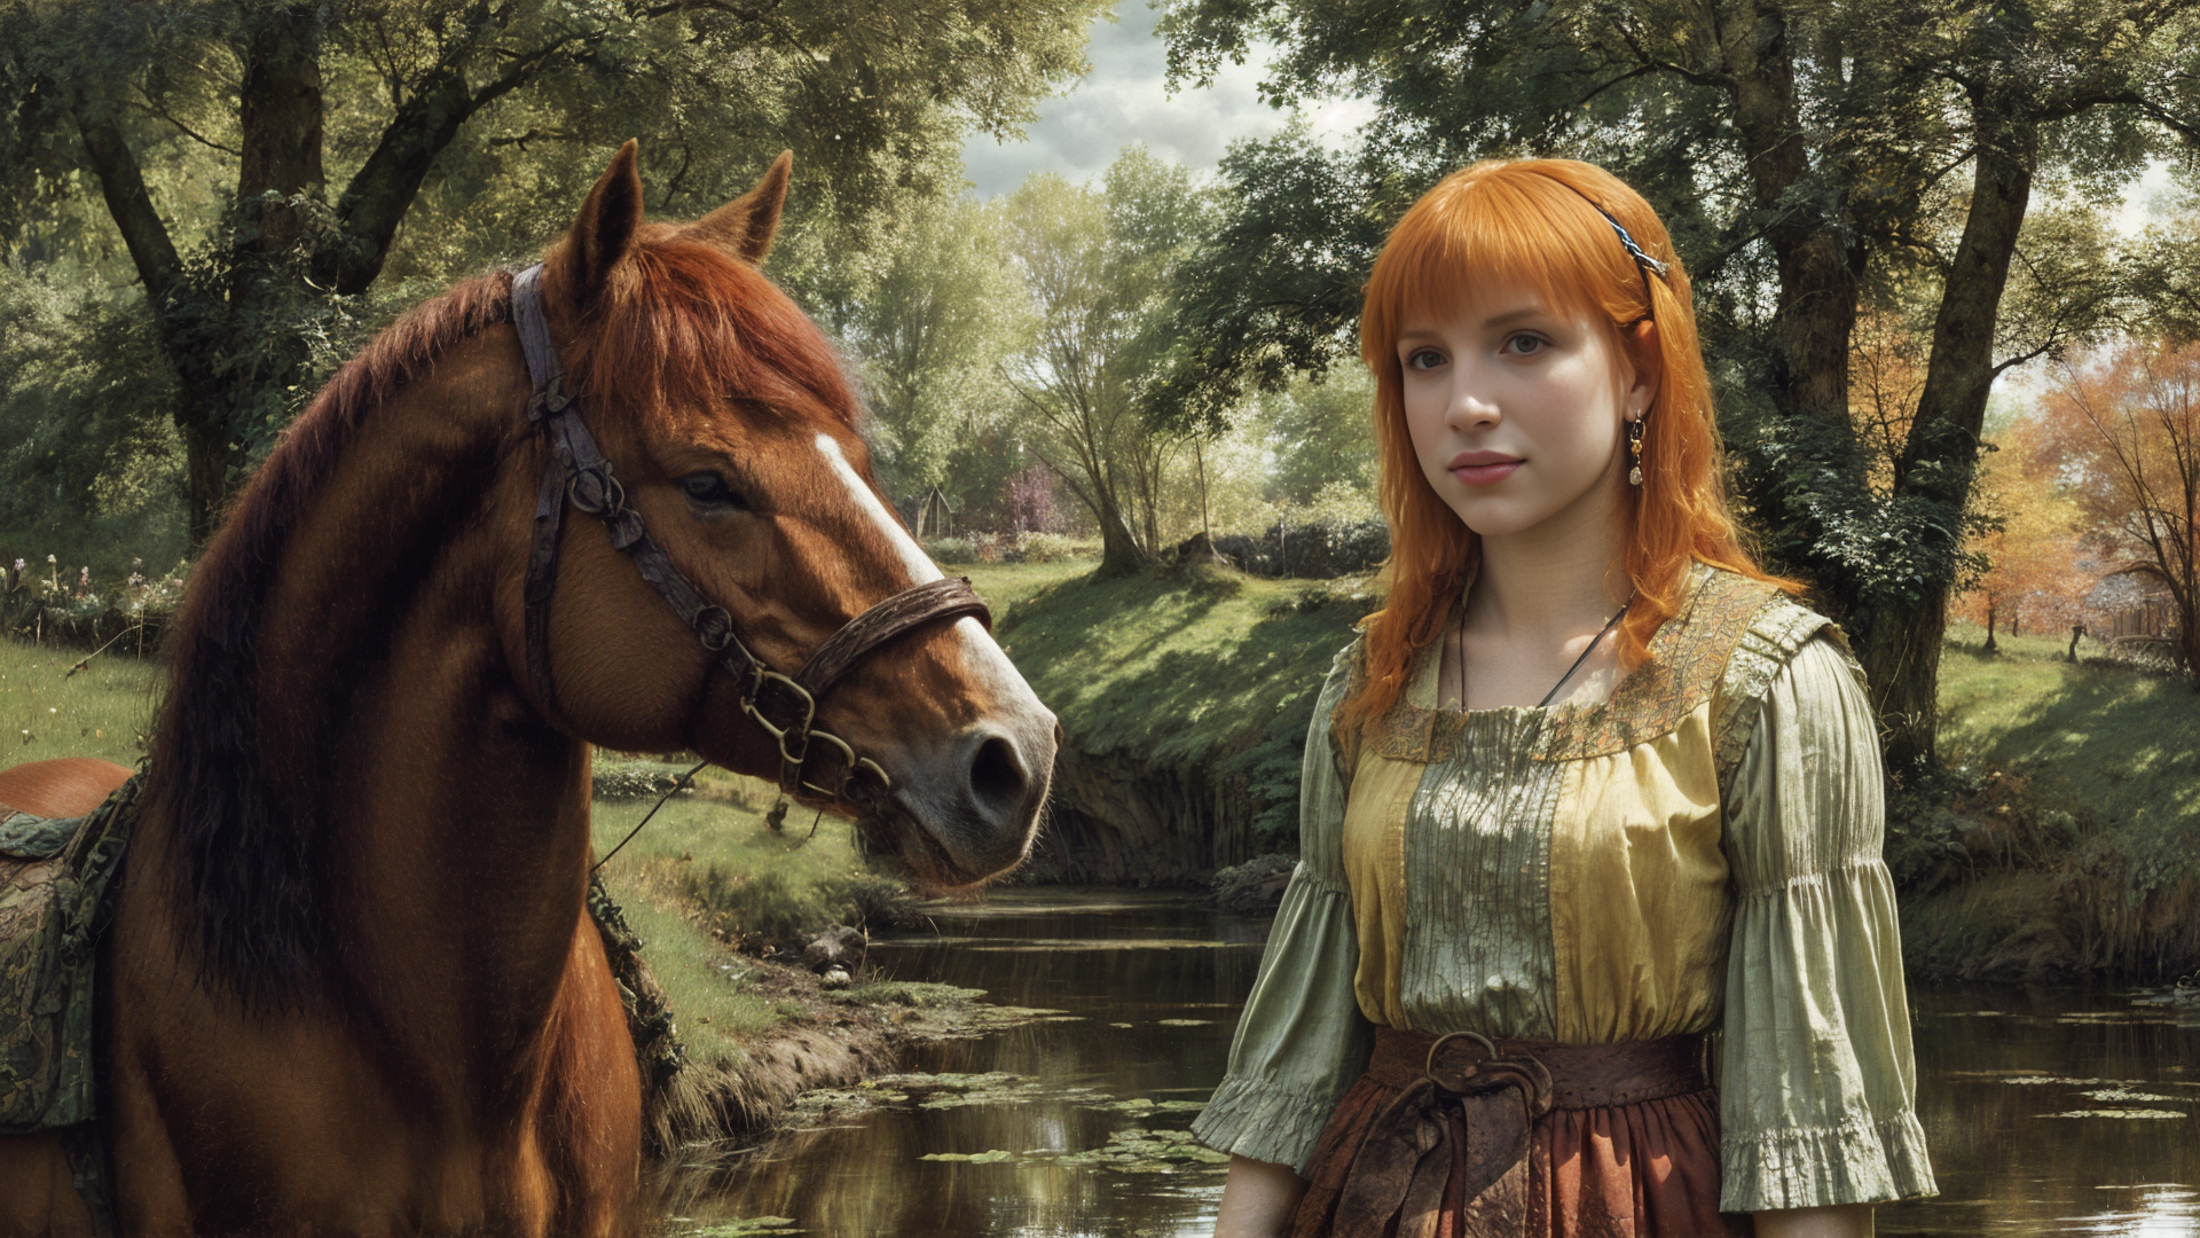 A young woman with red hair standing next to a brown horse by a body of water.